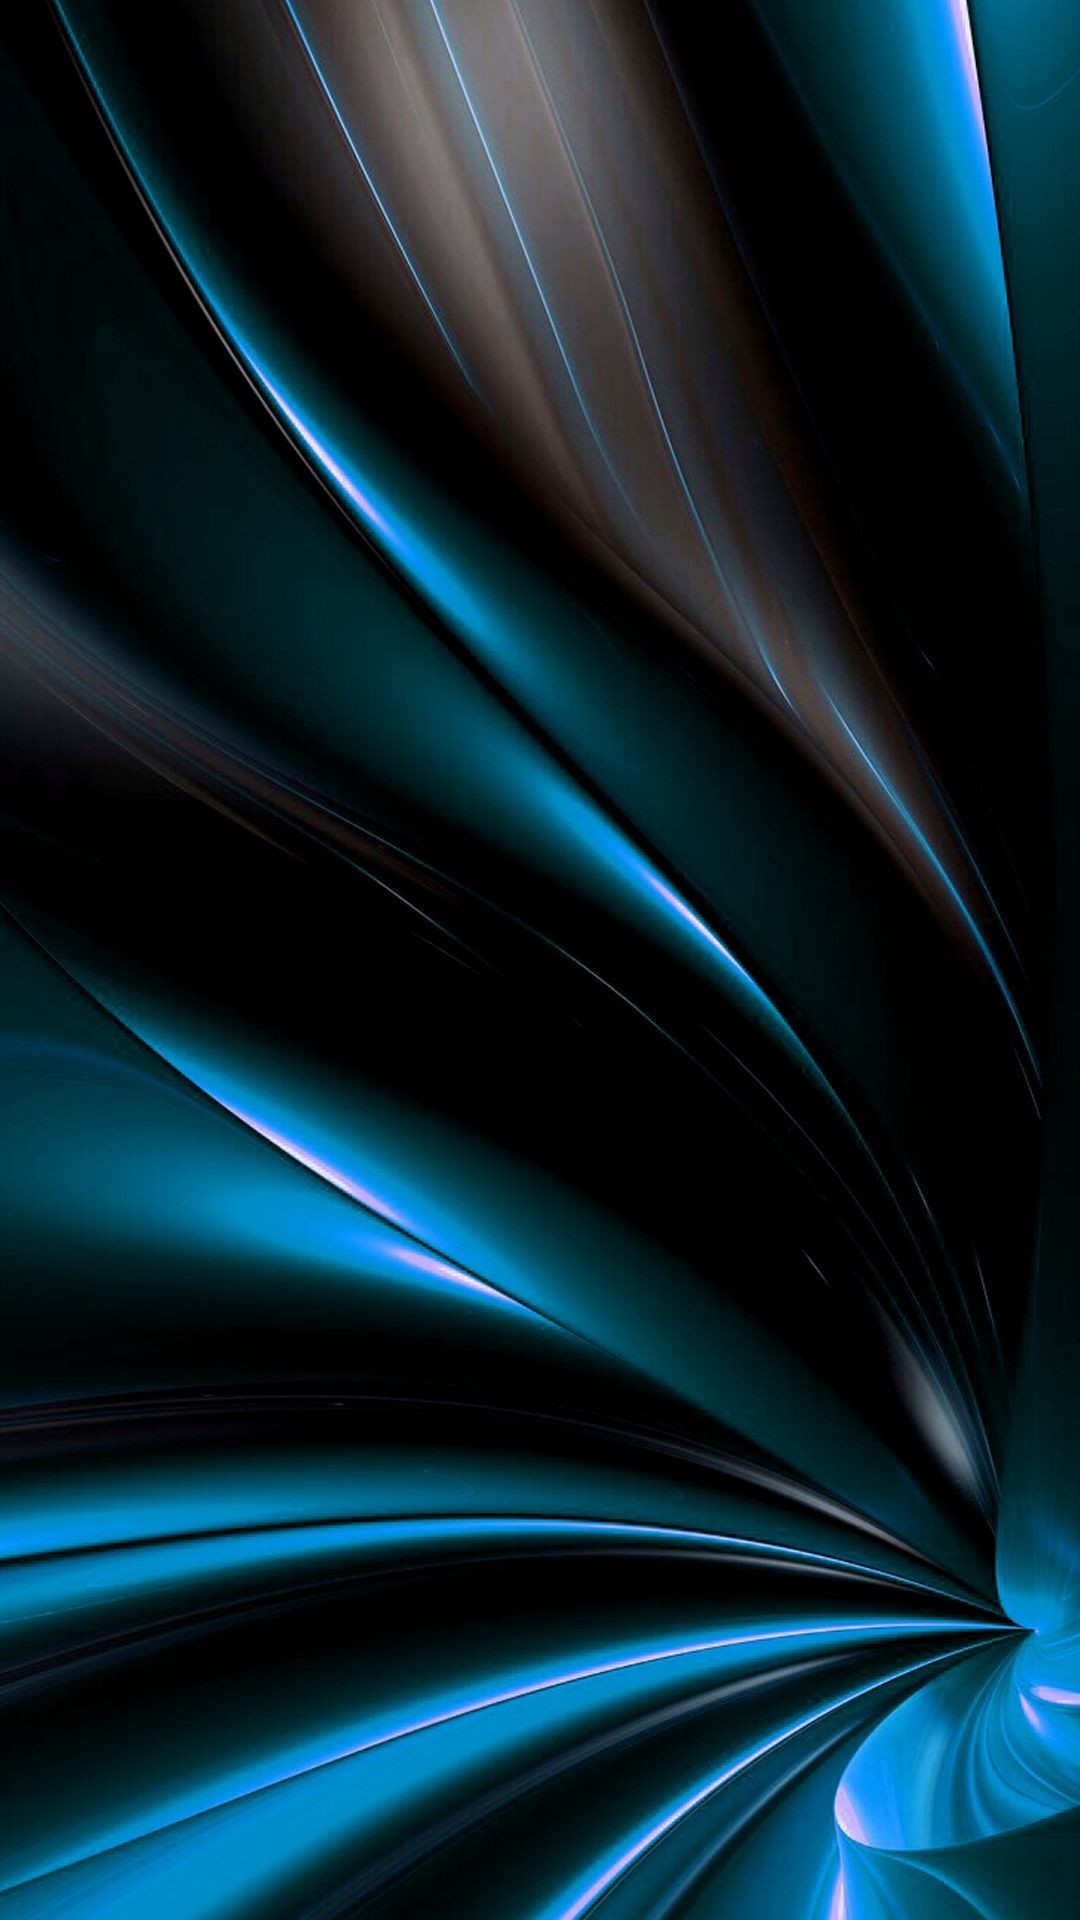 Awesome Home Screen Wallpaper